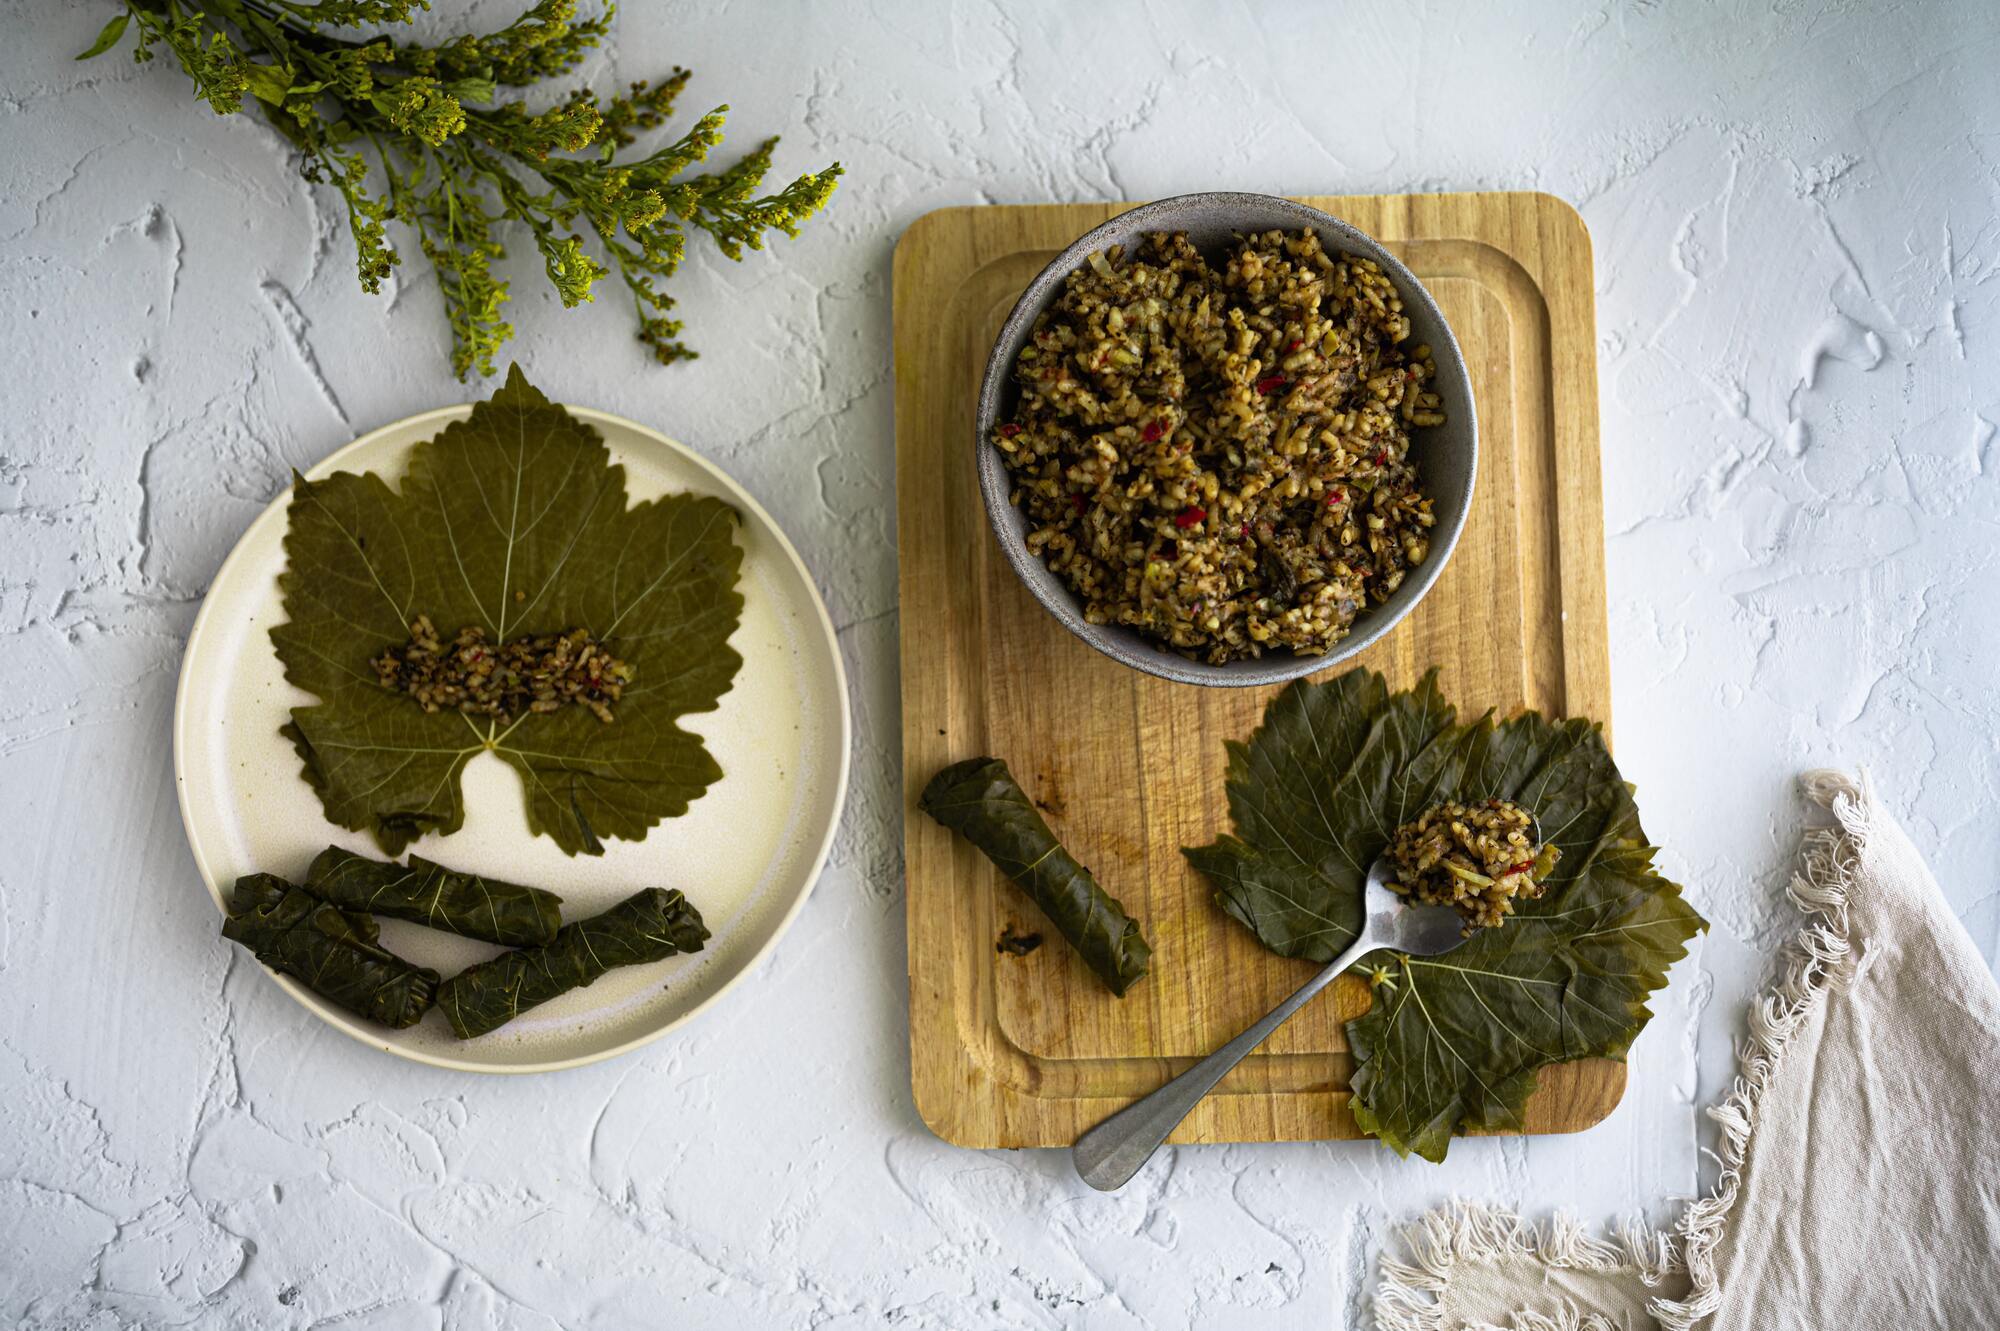 What to make dolma from